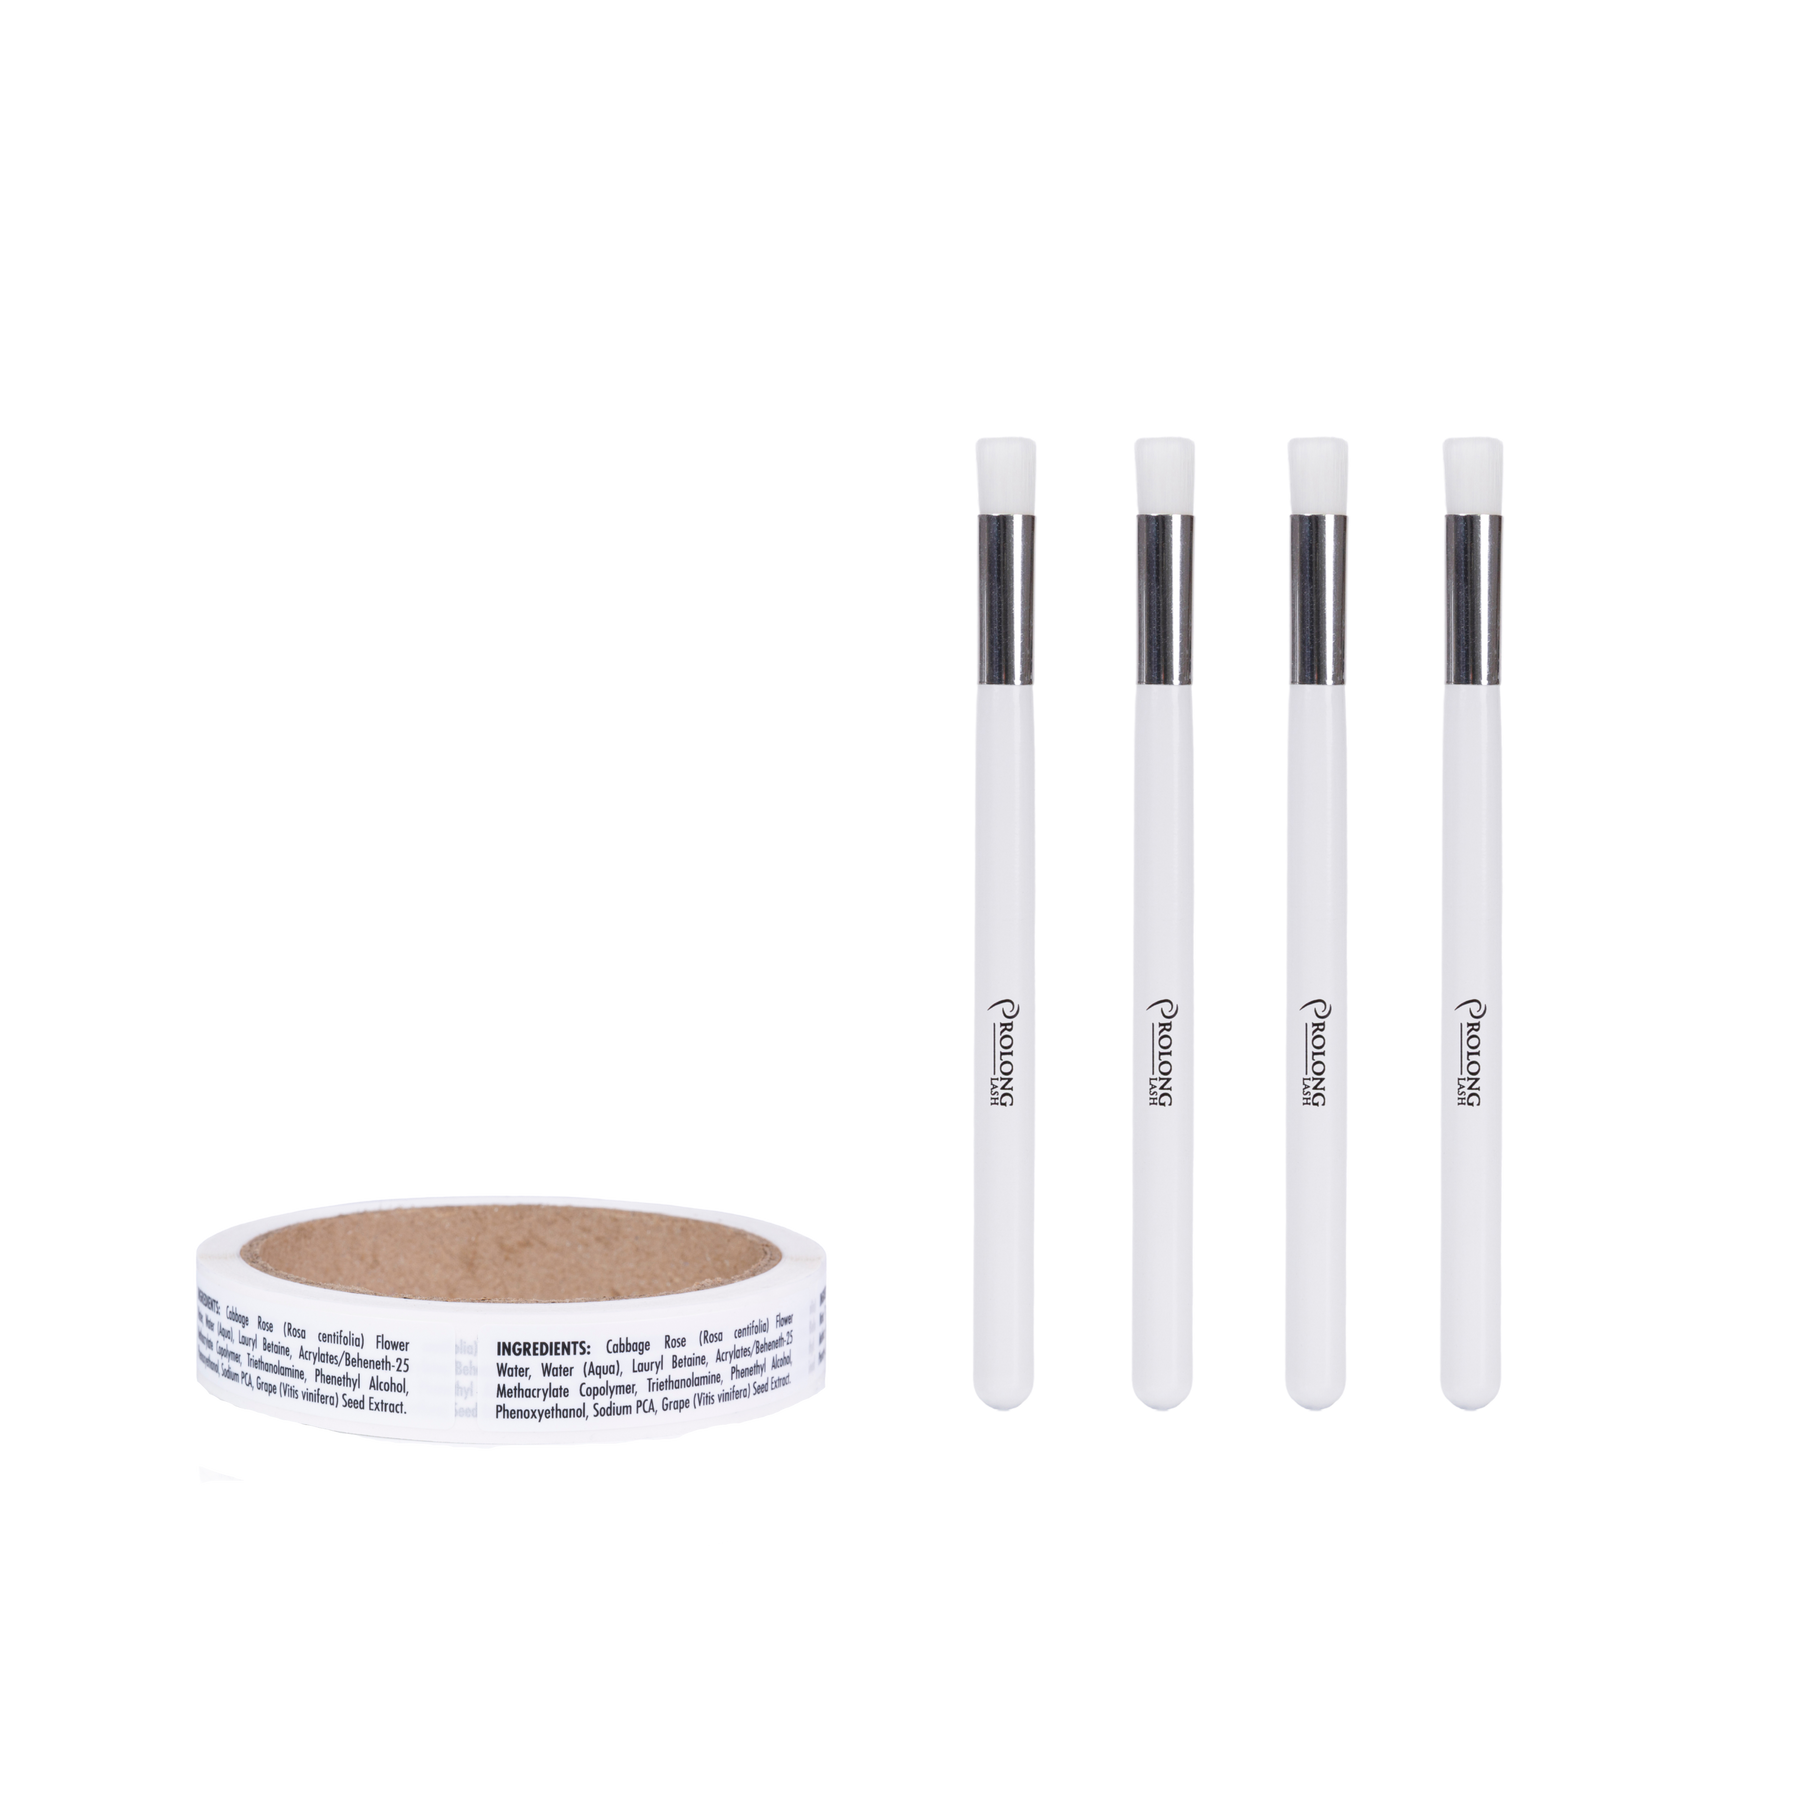 Cleanser Concentrate Ingredient labels and eyelash extension cleansing brushes